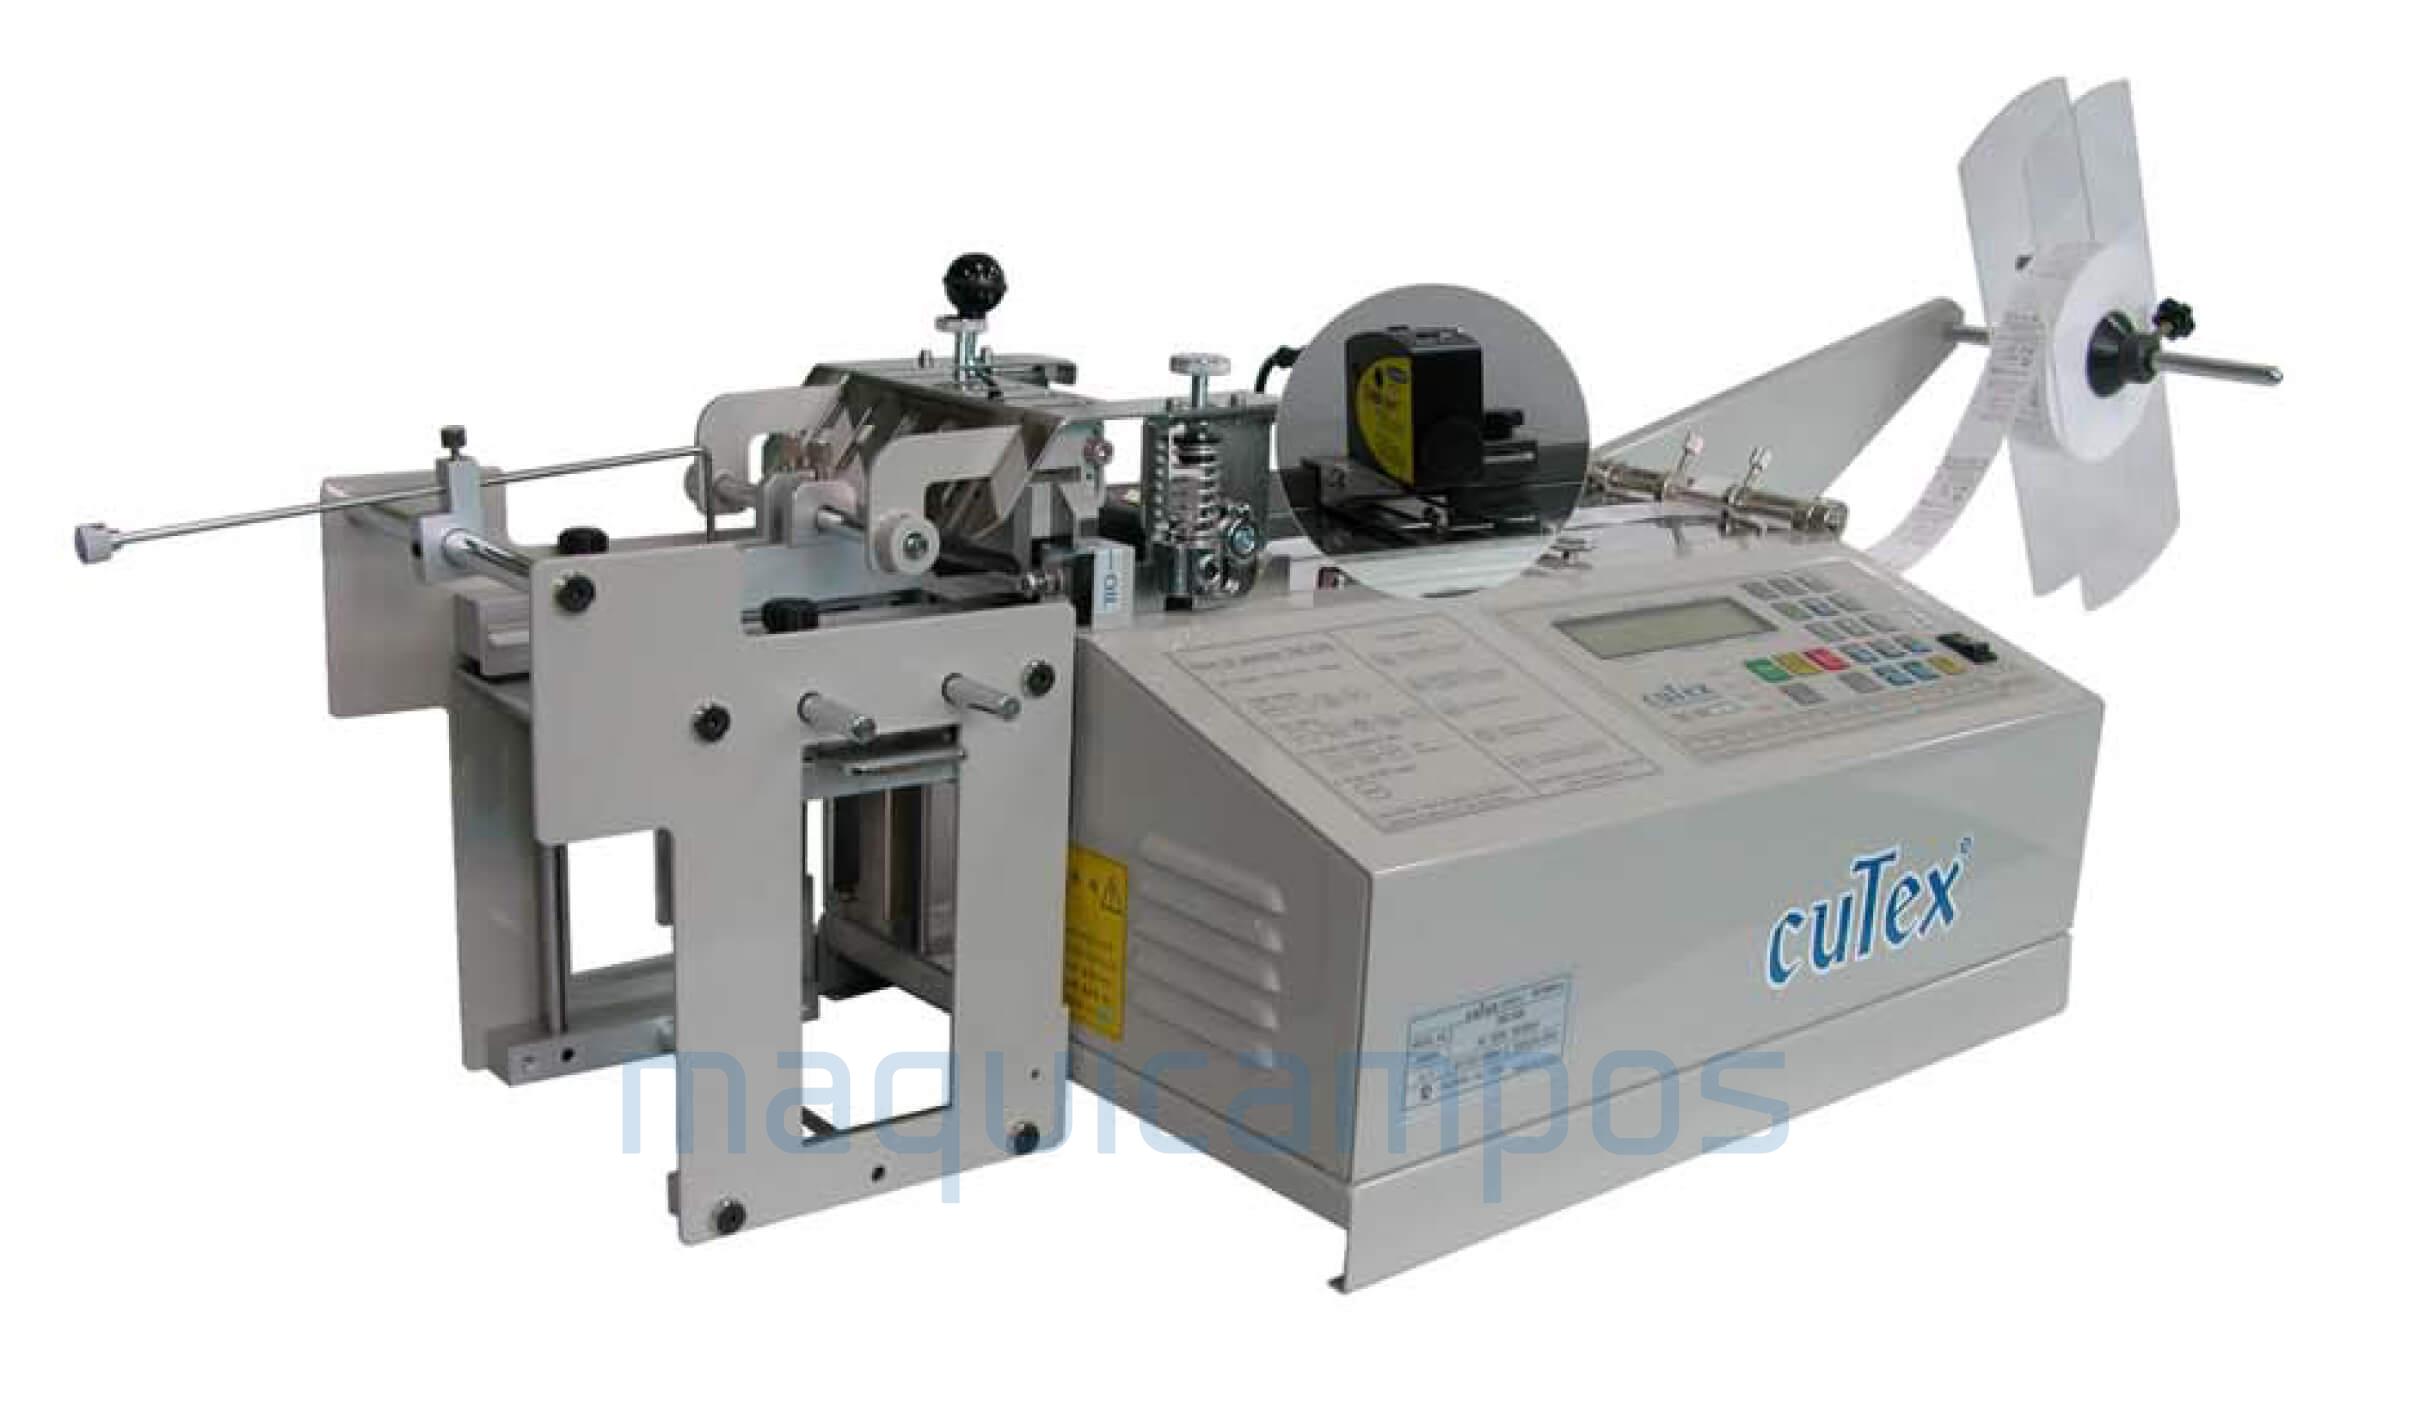 Cutex TBC-55SK Label Cold Cutting Machine with Stacker